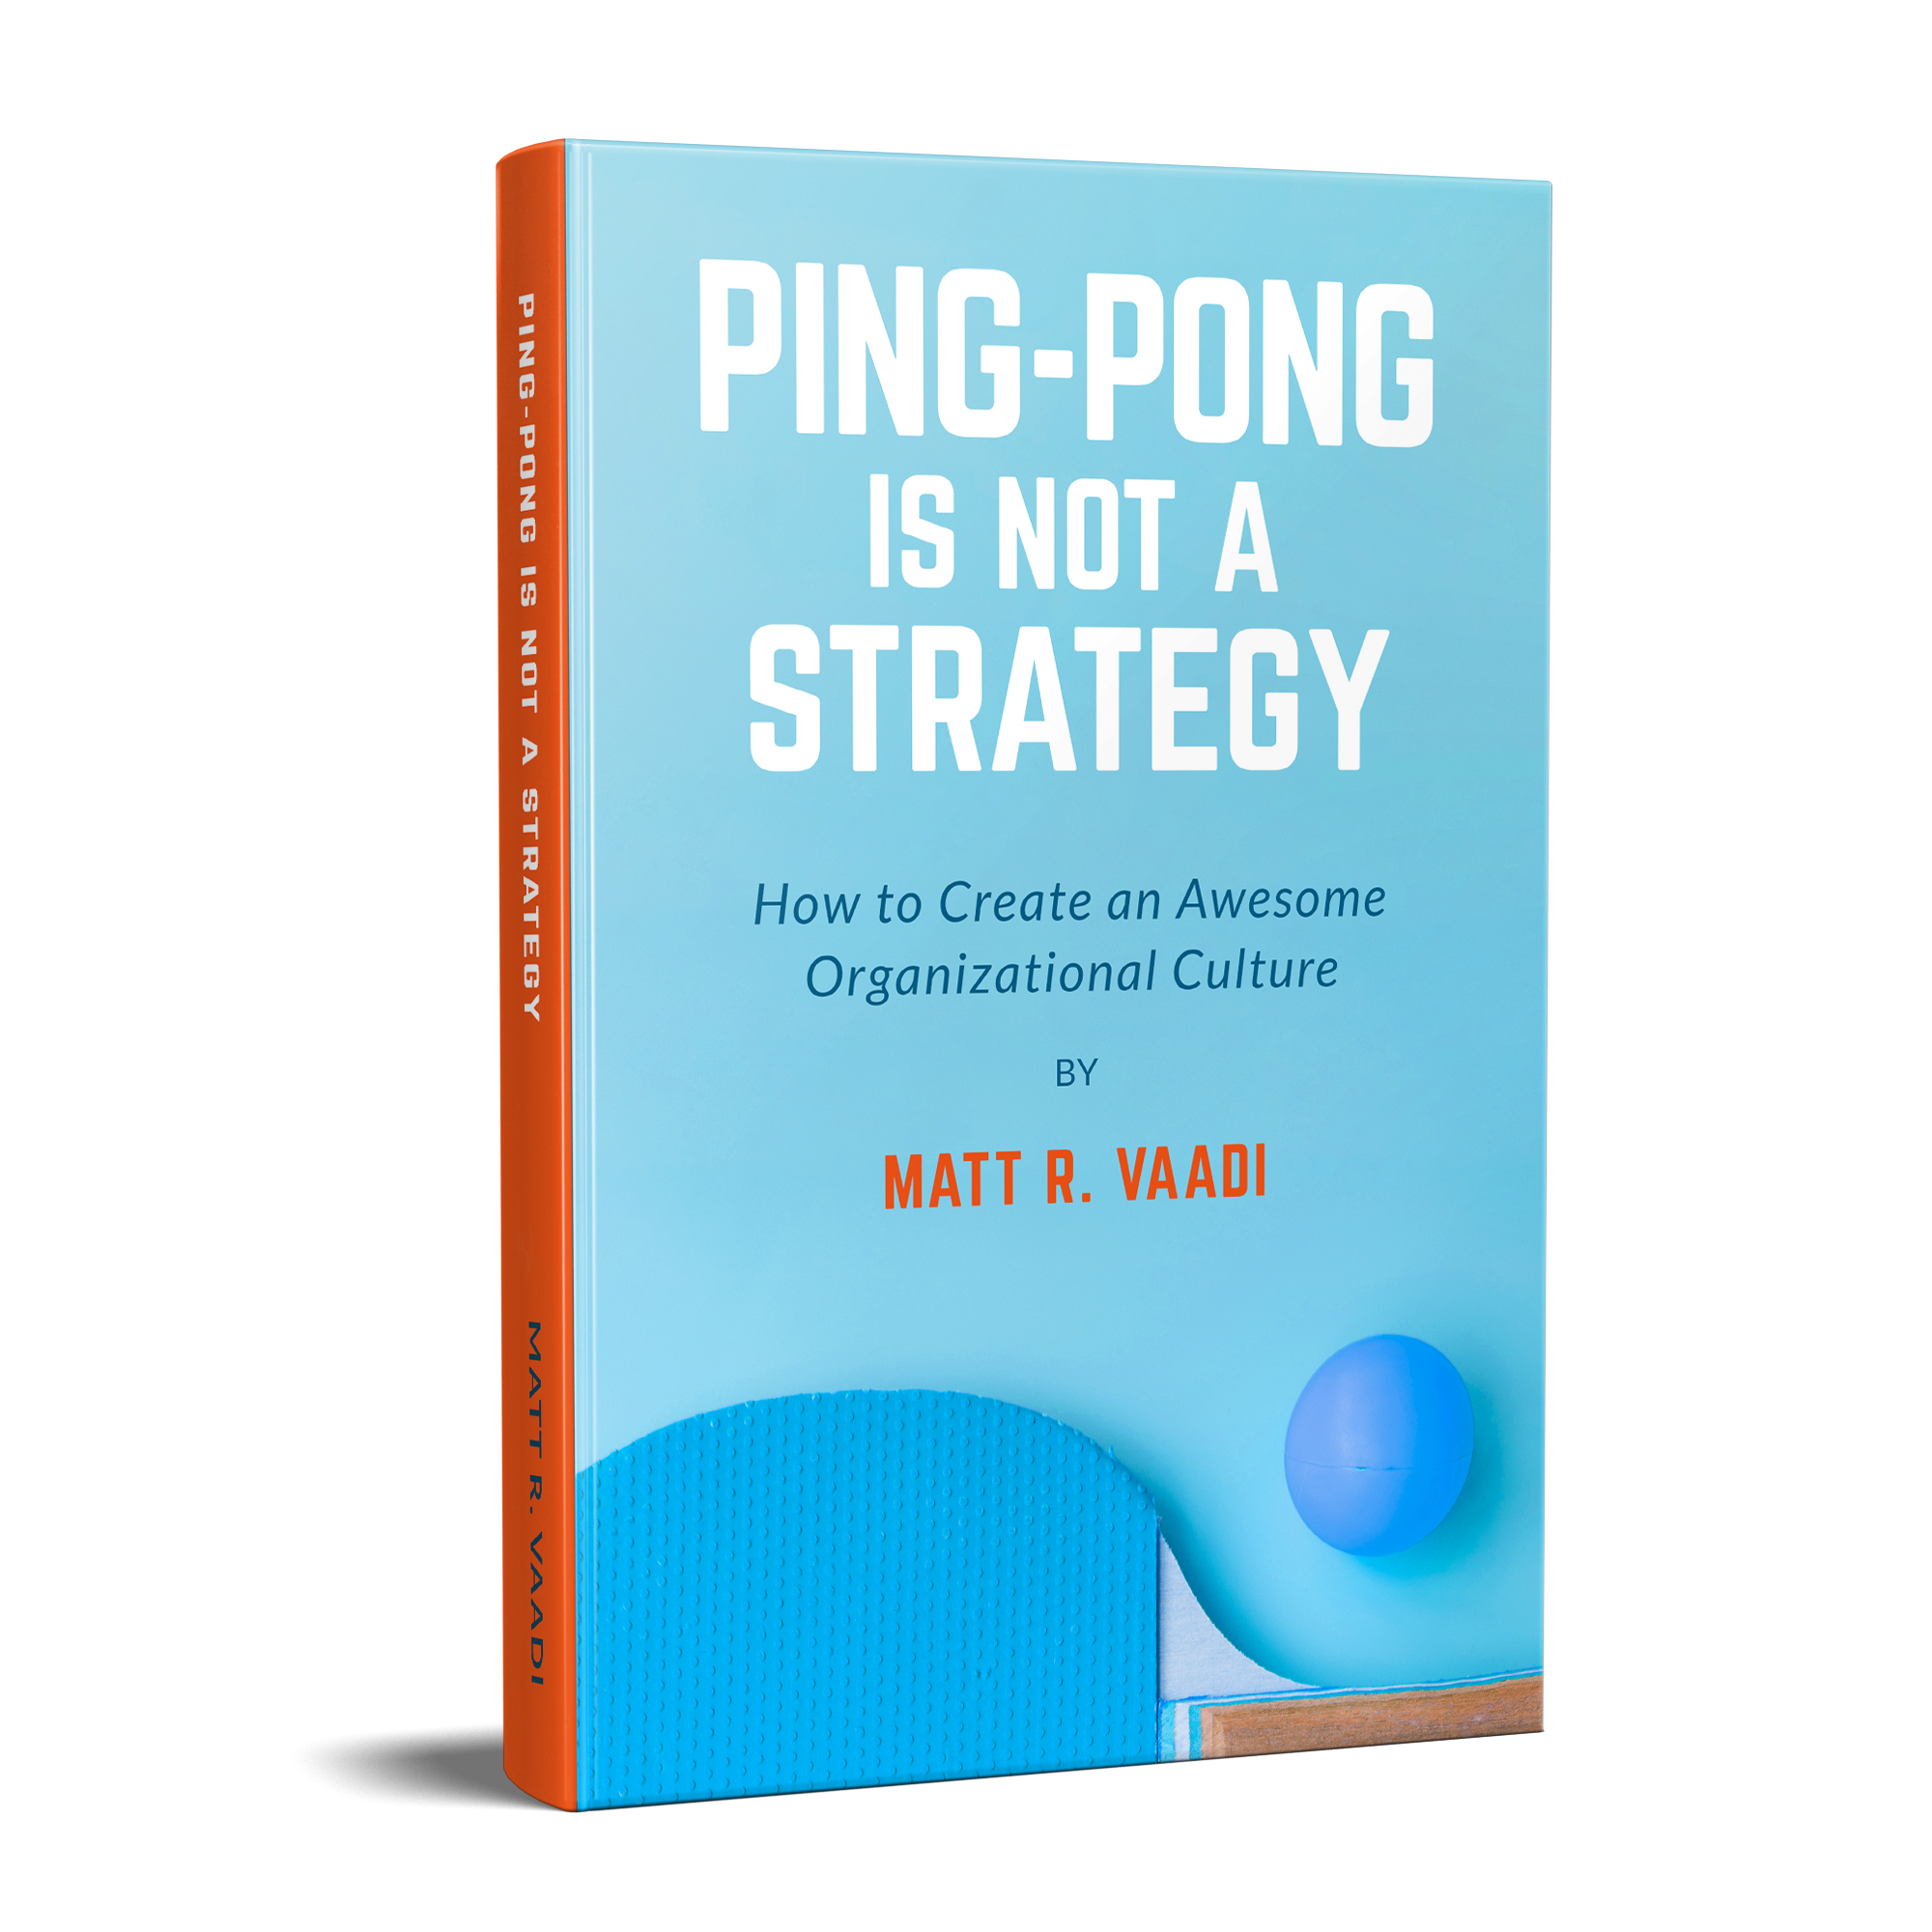 FREE: Ping-Pong is Not a Strategy: How to Create an Awesome Organizational Culture by Matt Vaadi